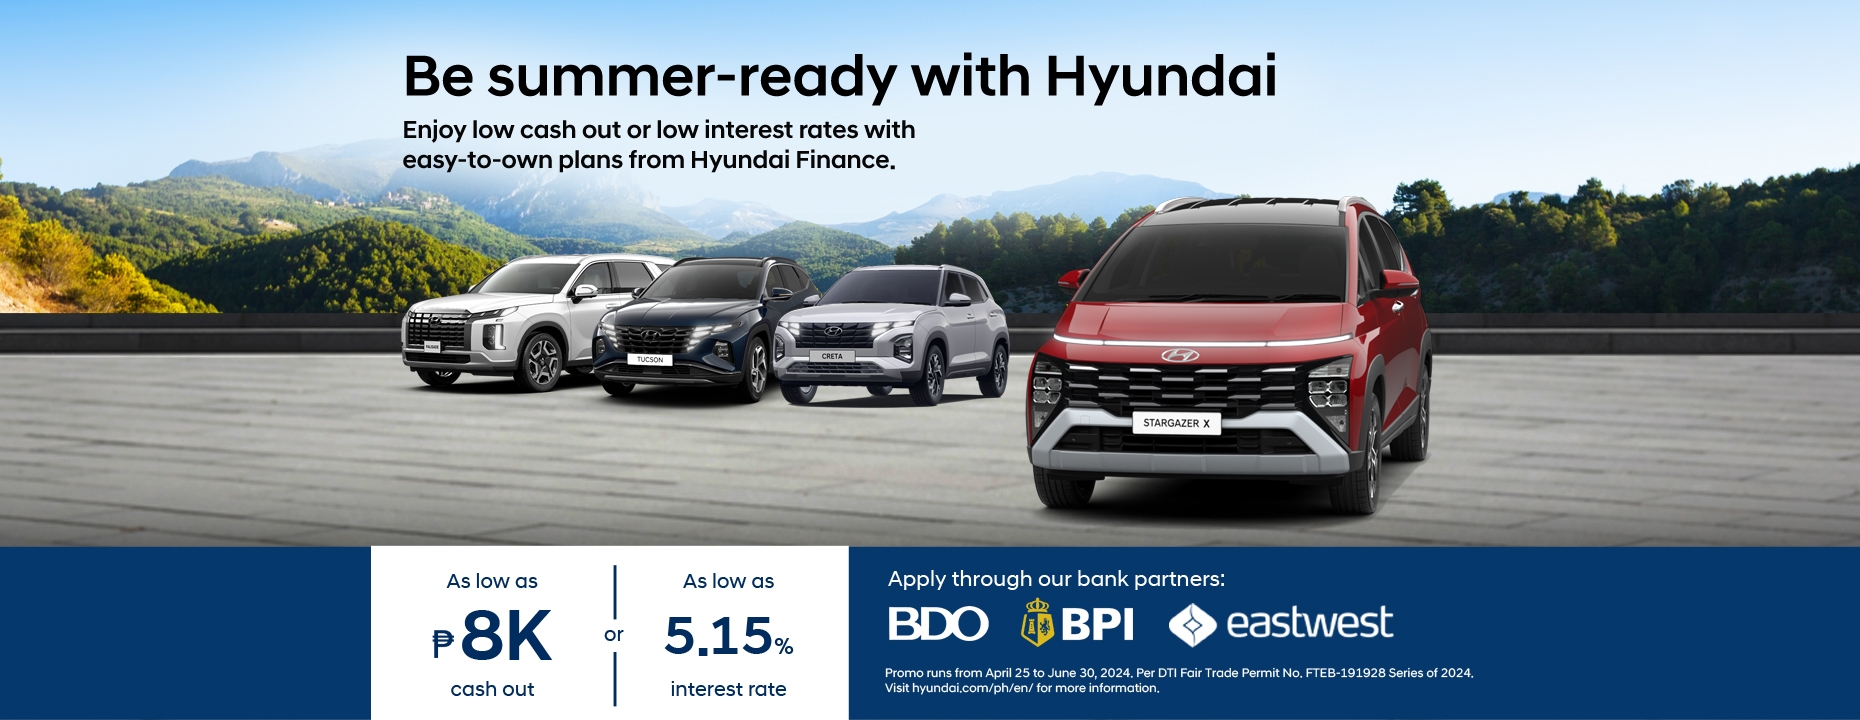 two hyundai stargazer vehicles in a skyline background with sales promo details